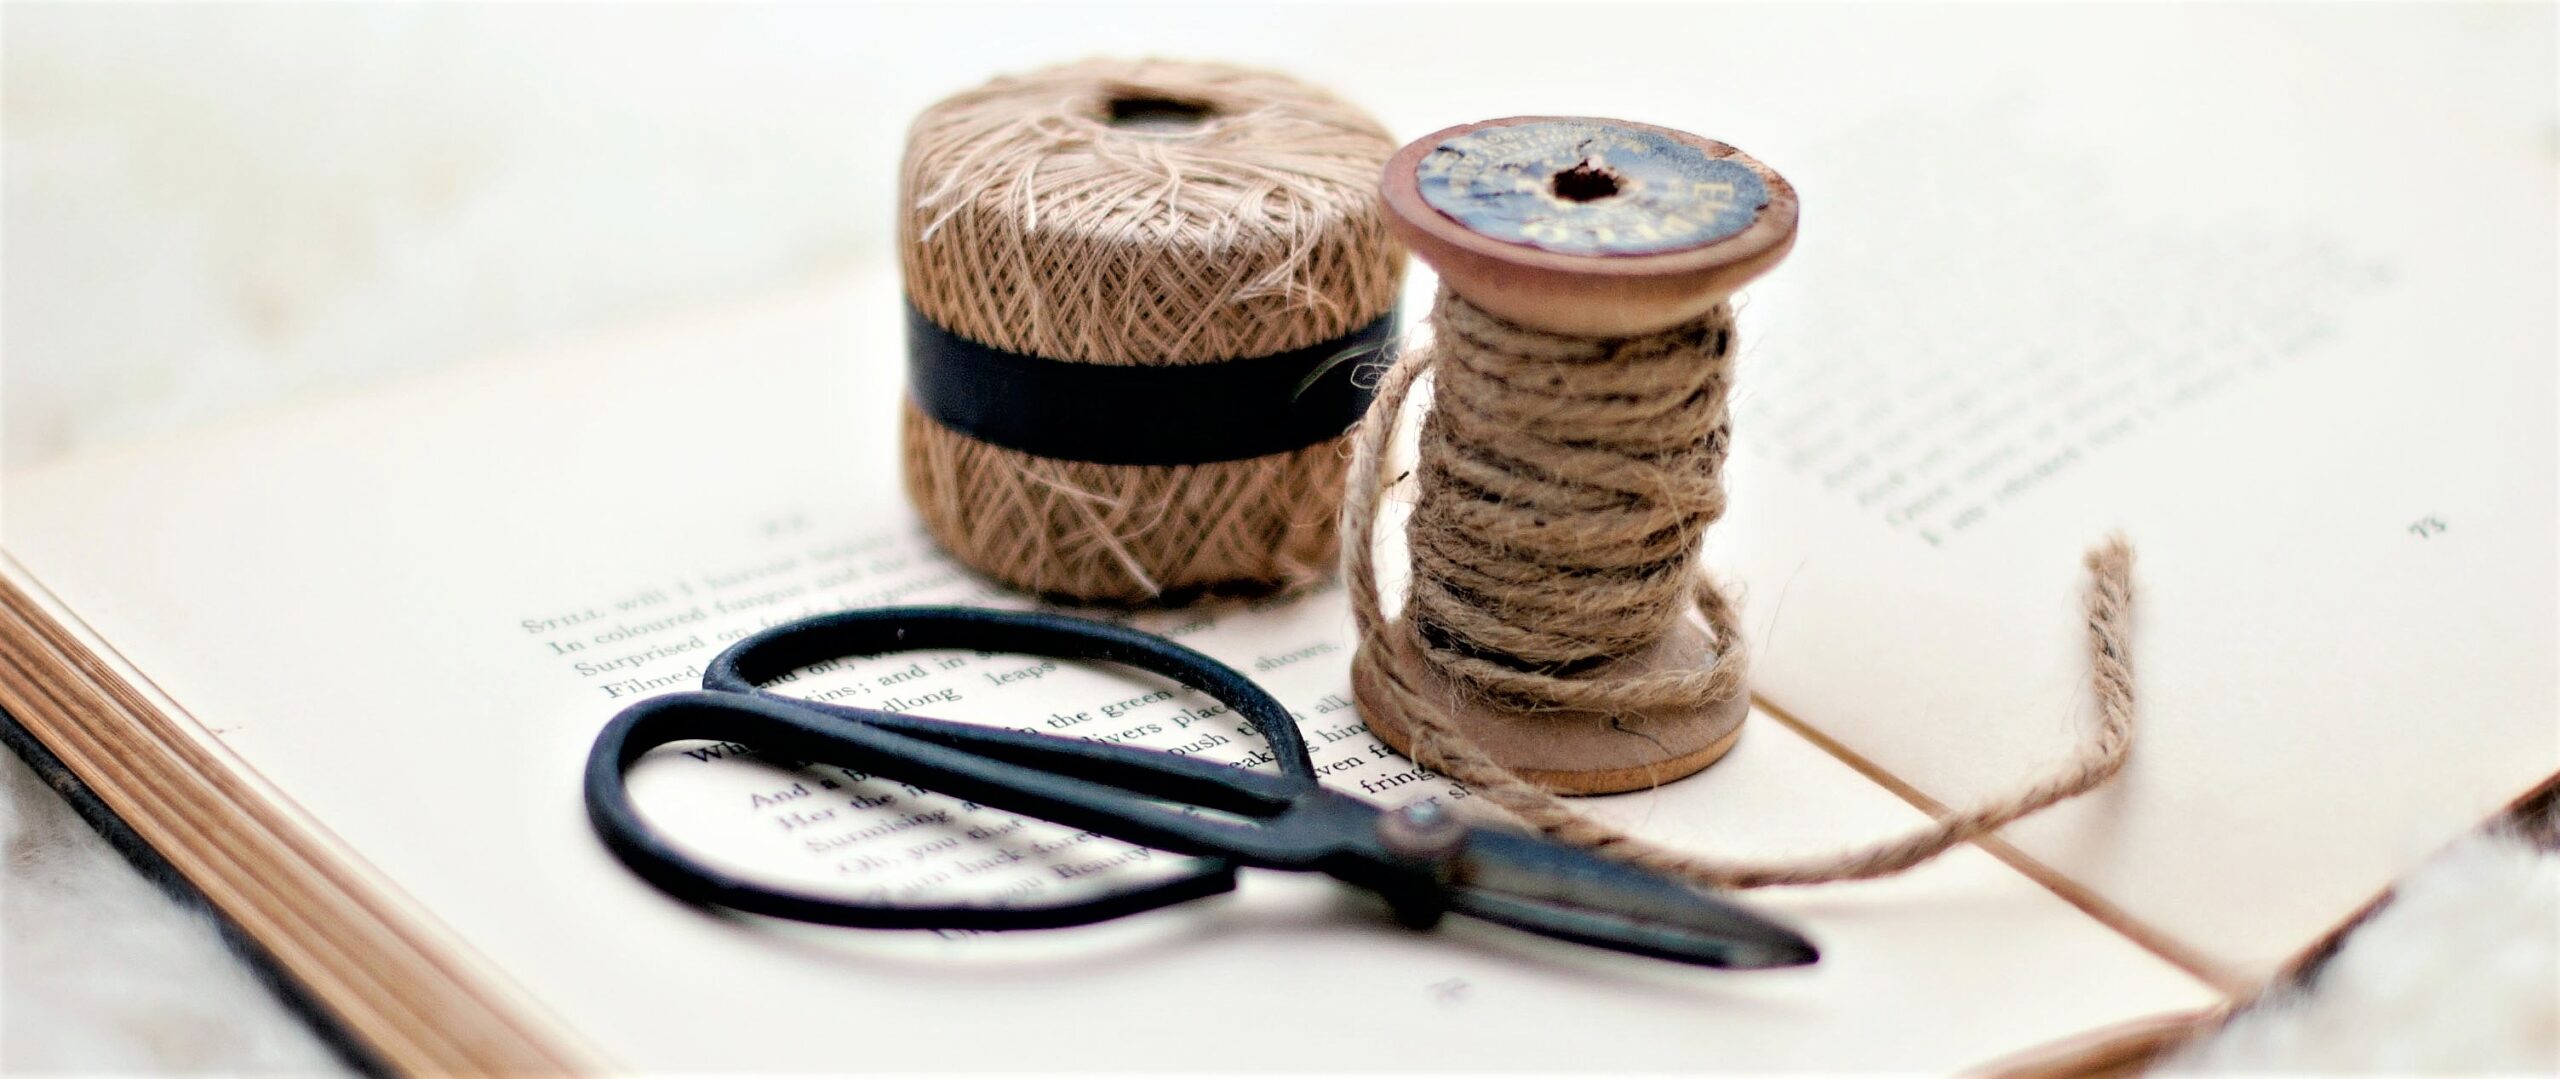 Two spools of twine are resting on an open book with a pair of metal scissors by their side.